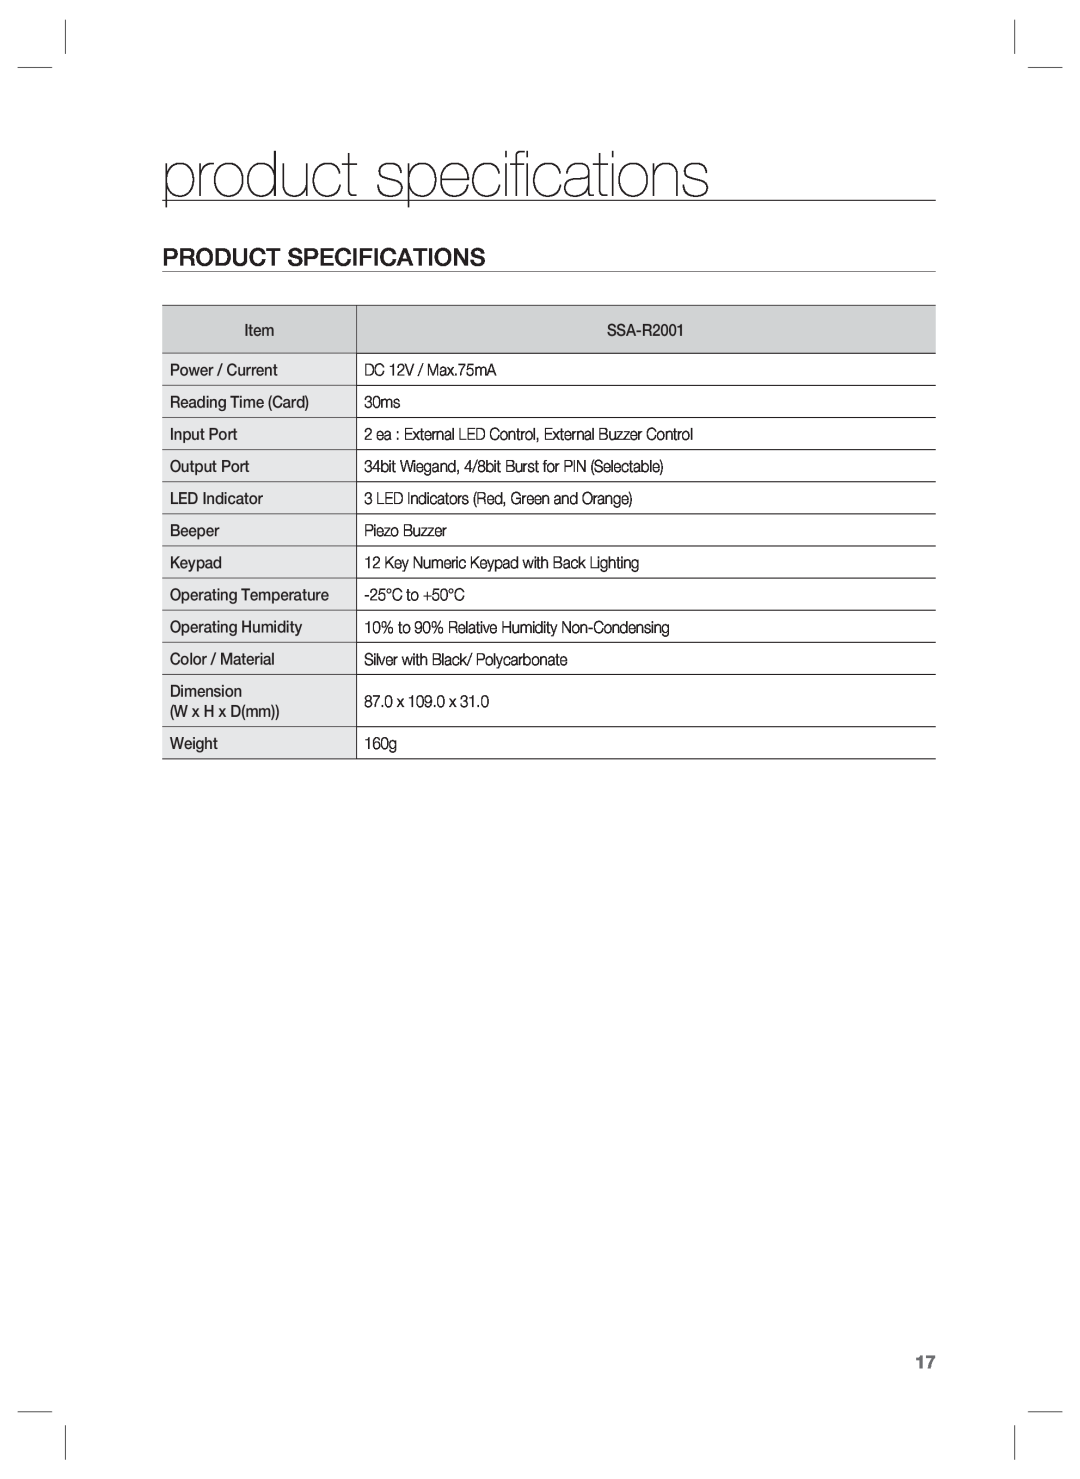 Samsung SSA-R2001 user manual product speciﬁcations, Product Specifications 